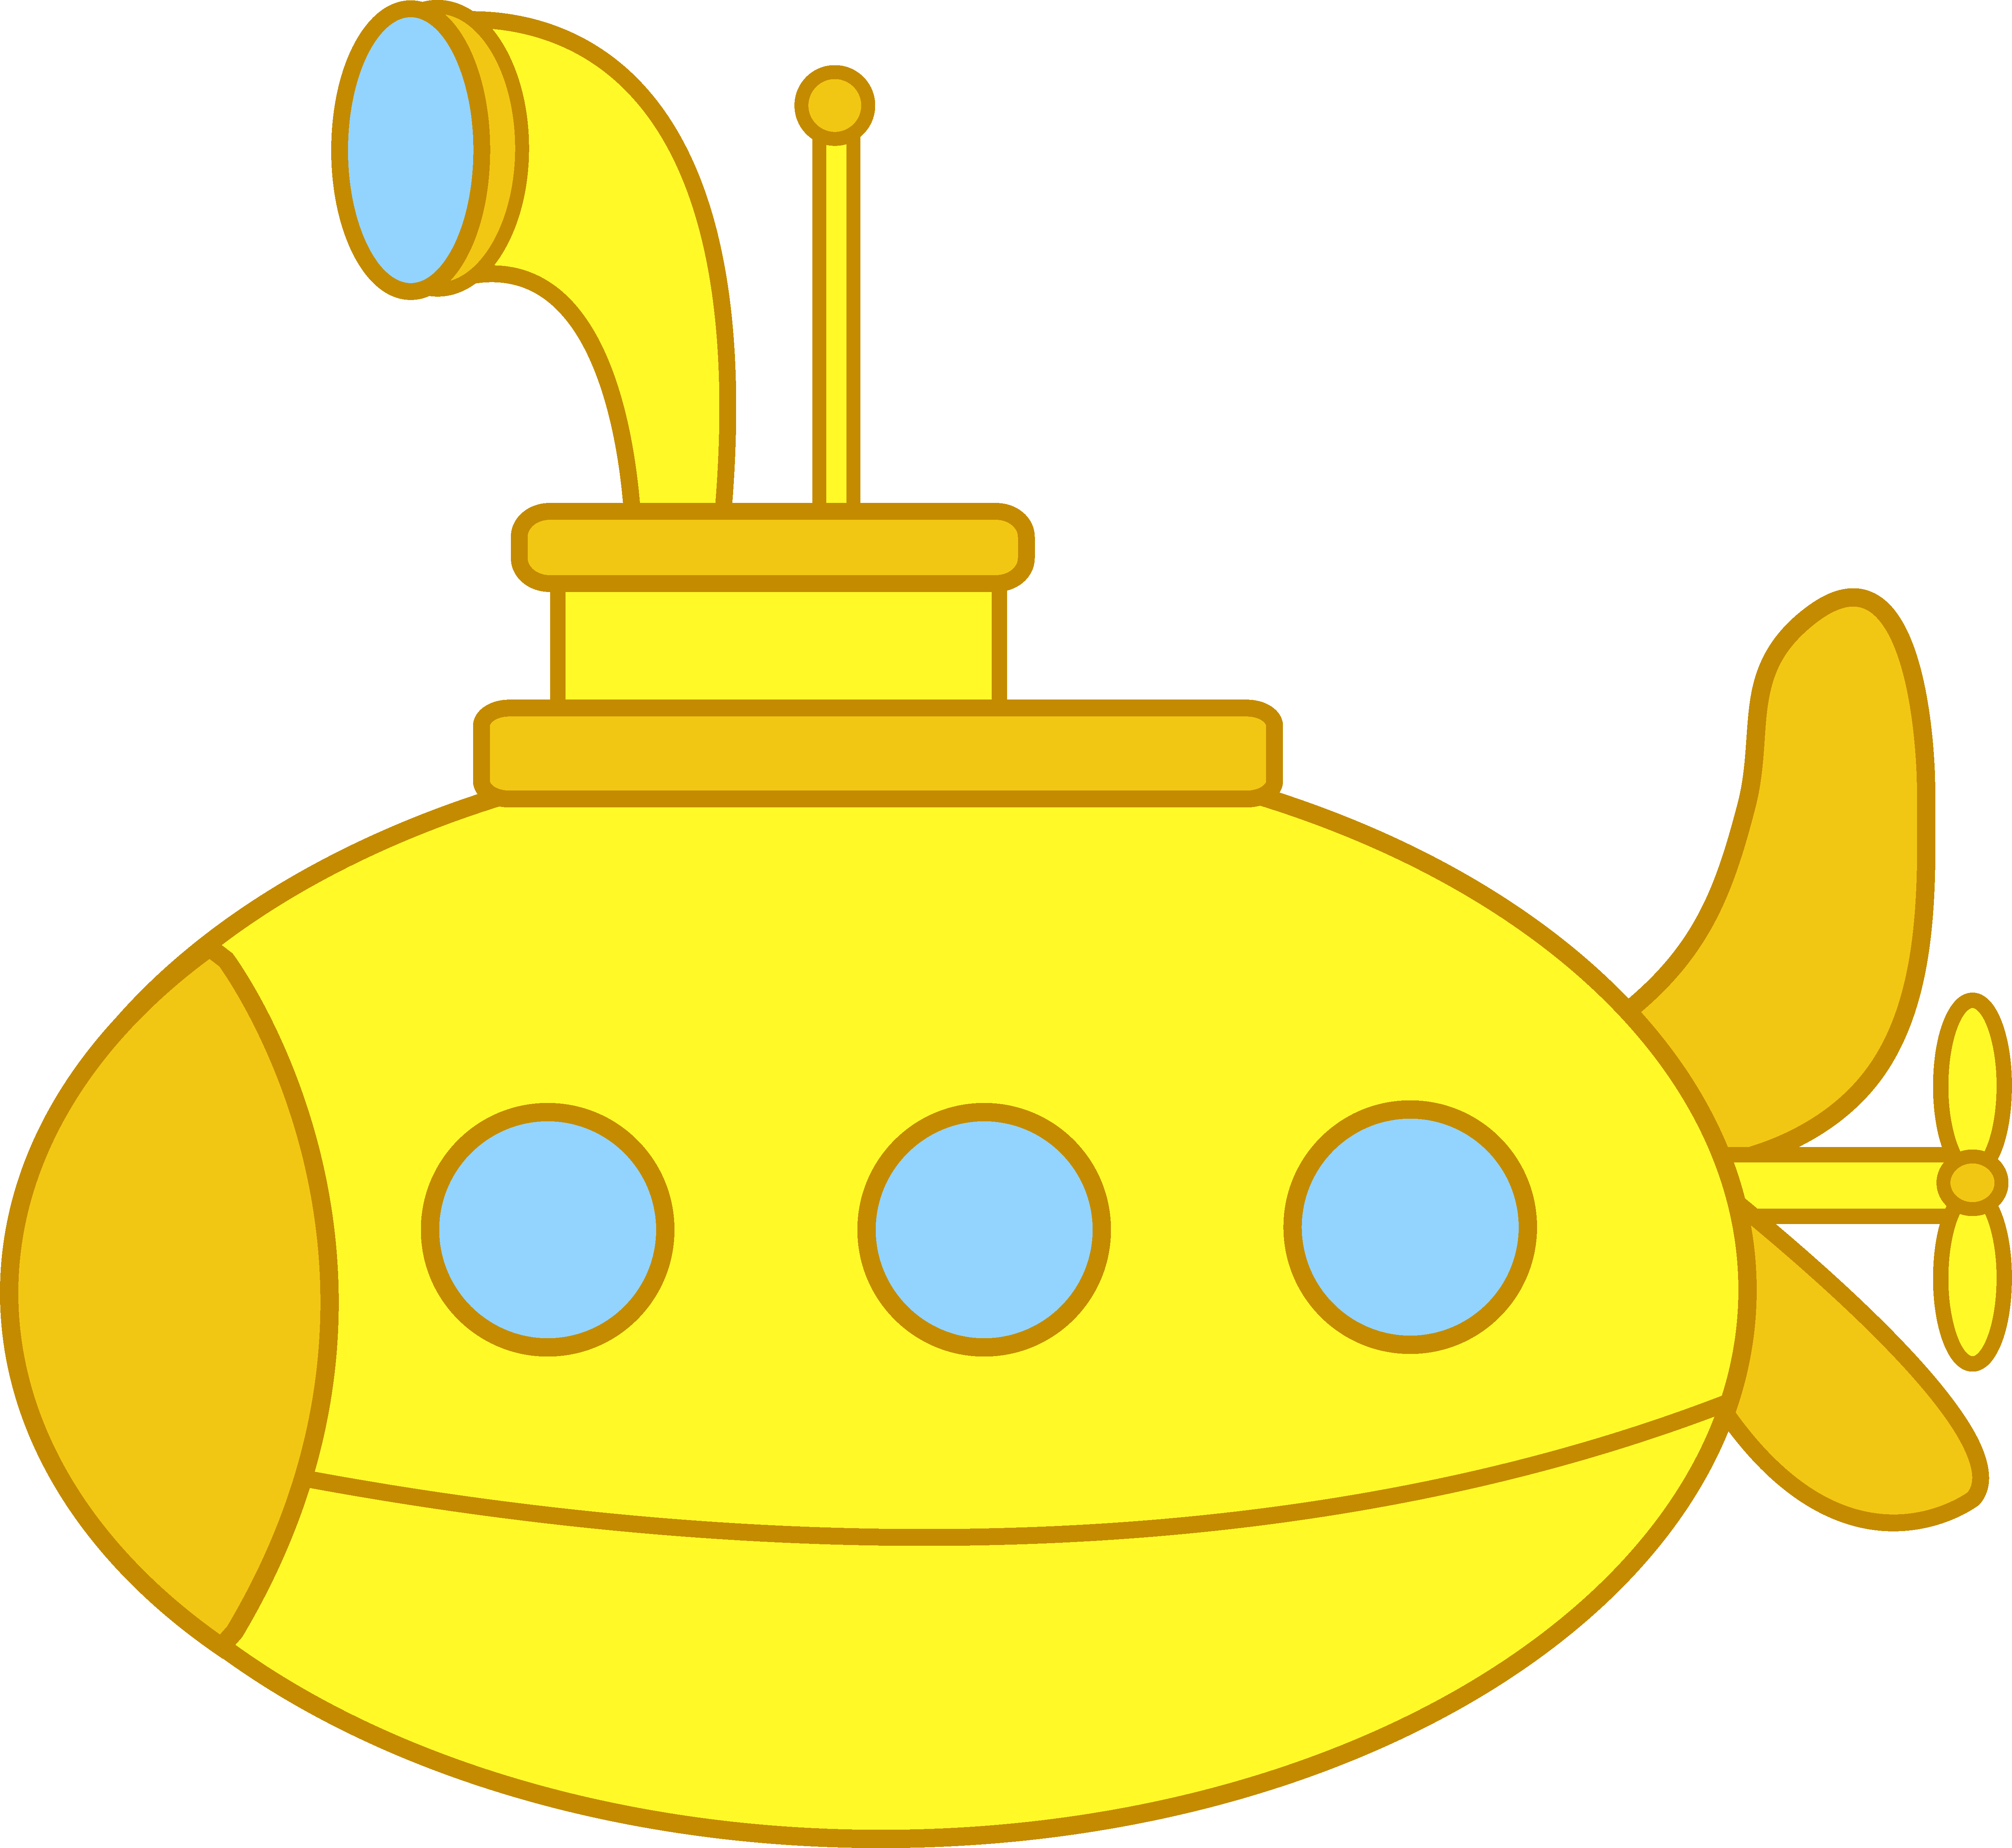 Submarine Clipart for free download.